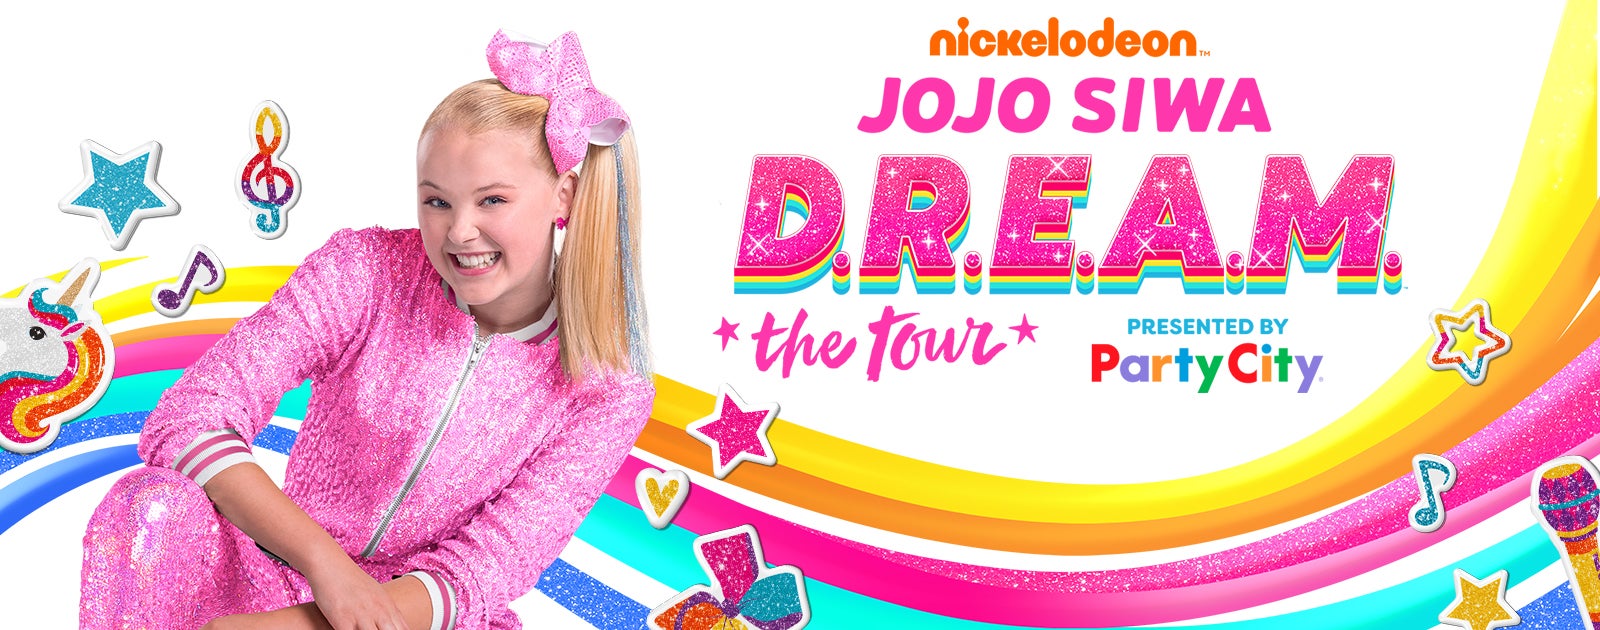 Nickelodeon's JoJo Siwa D.R.E.A.M. Tour with special guests The Belles